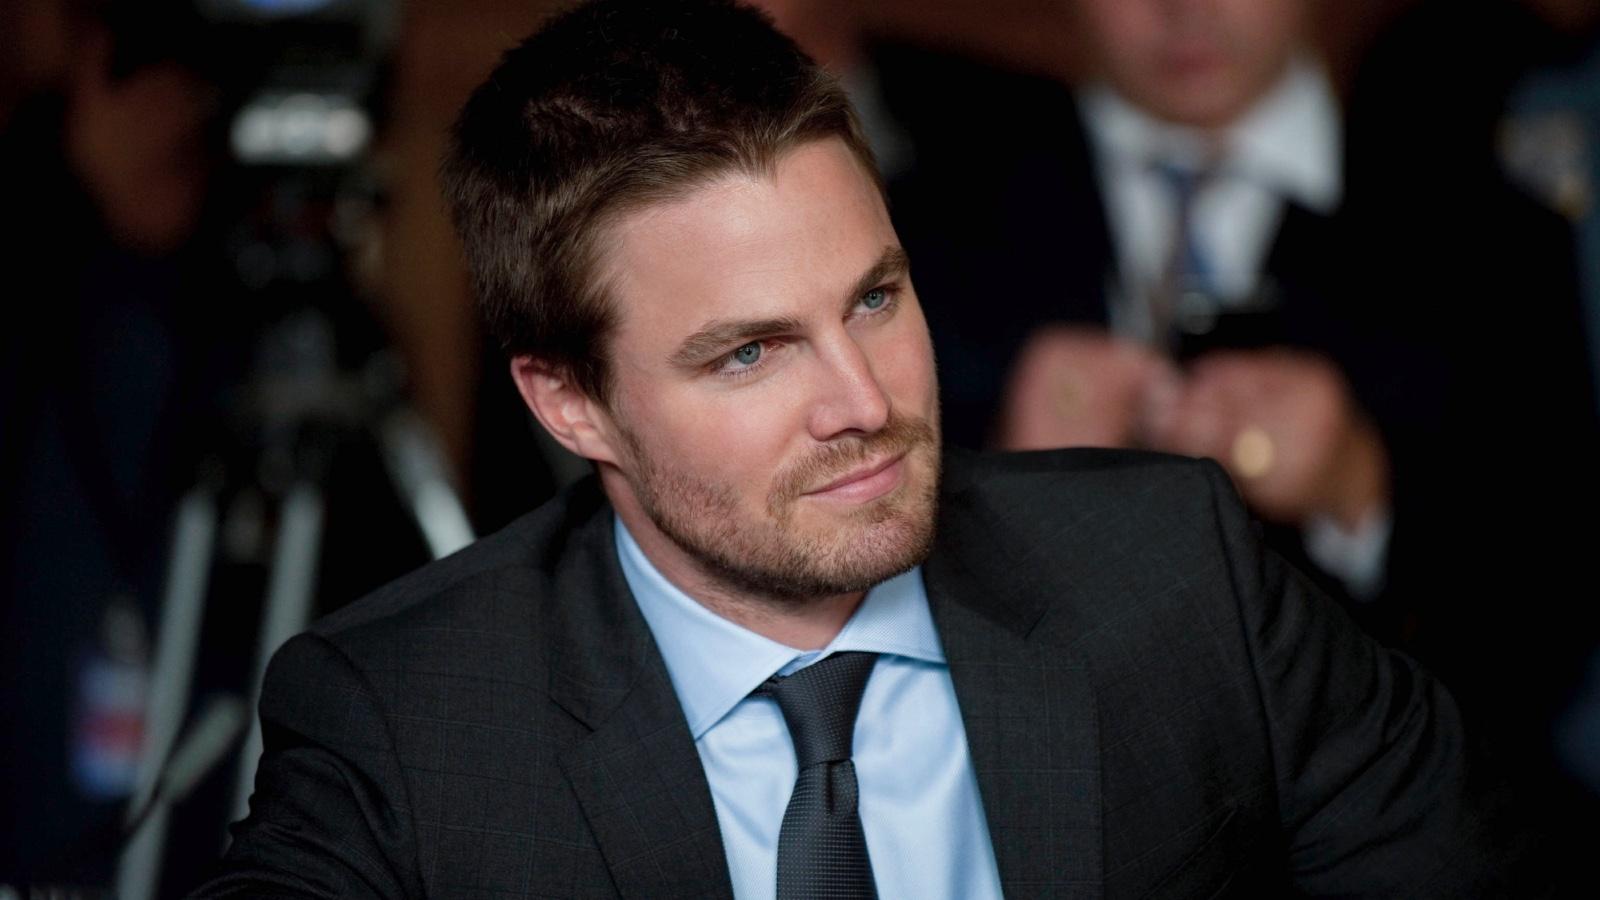 Stephen Amell in Arrow as Oliver Queen